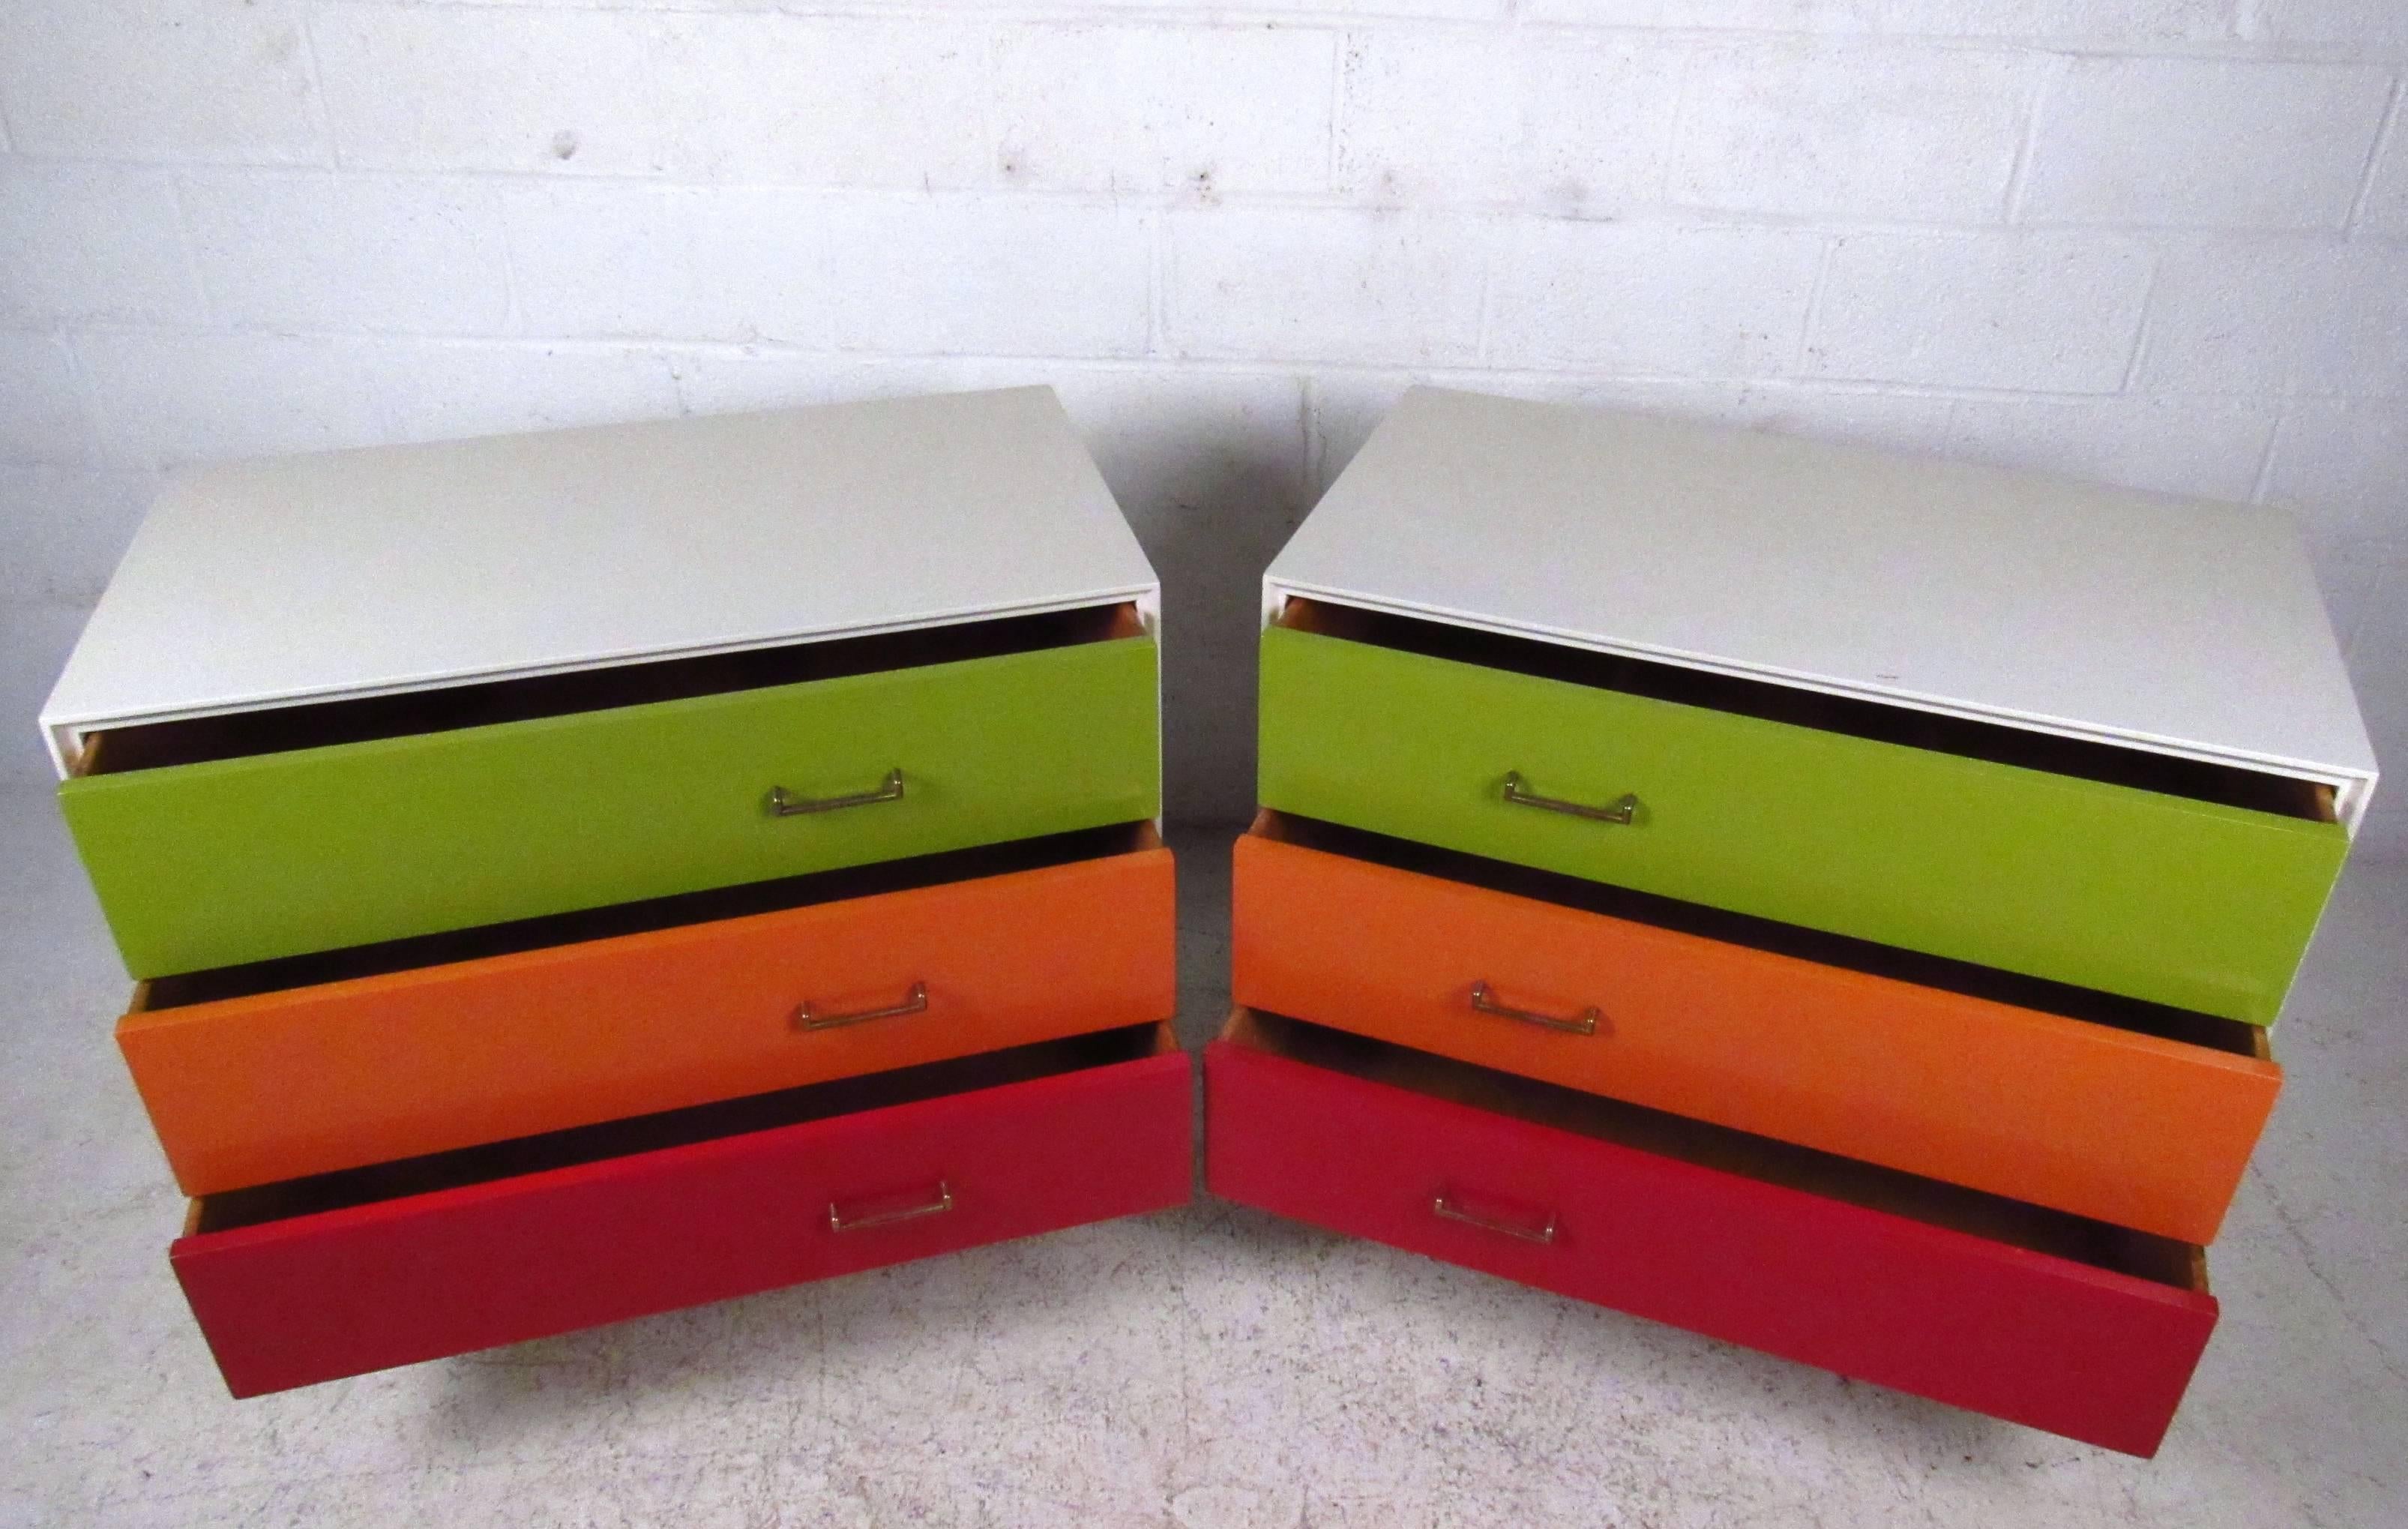 This unique pair of vintage multicolor bachelor's chests make the perfect addition to any room. A wonderful splash of color for a children's room or nursery, or for use as a funky storage solution in any setting. Manufactured by Furnette, this